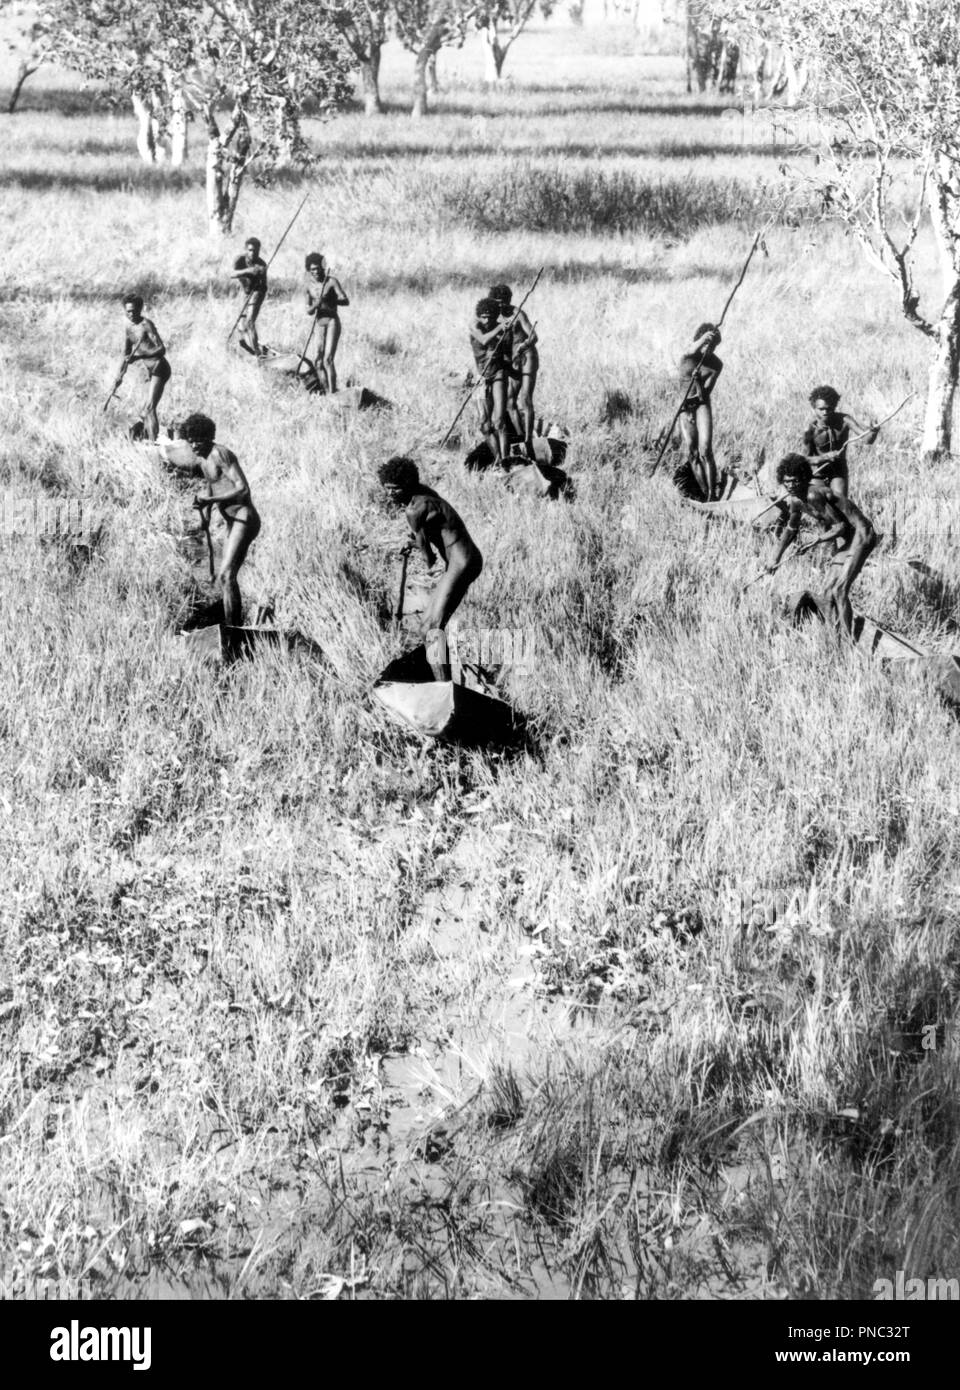 The Goose Hunters of the Arafura Swamp, central Arnhem Land, Australia, May 1937. Date/Period: 1937. Image. Black and white photograph Black and white photograph. Height: 245 mm (9.64 in); Width: 195 mm (7.67 in). Author: Donald F Thomson. Stock Photo